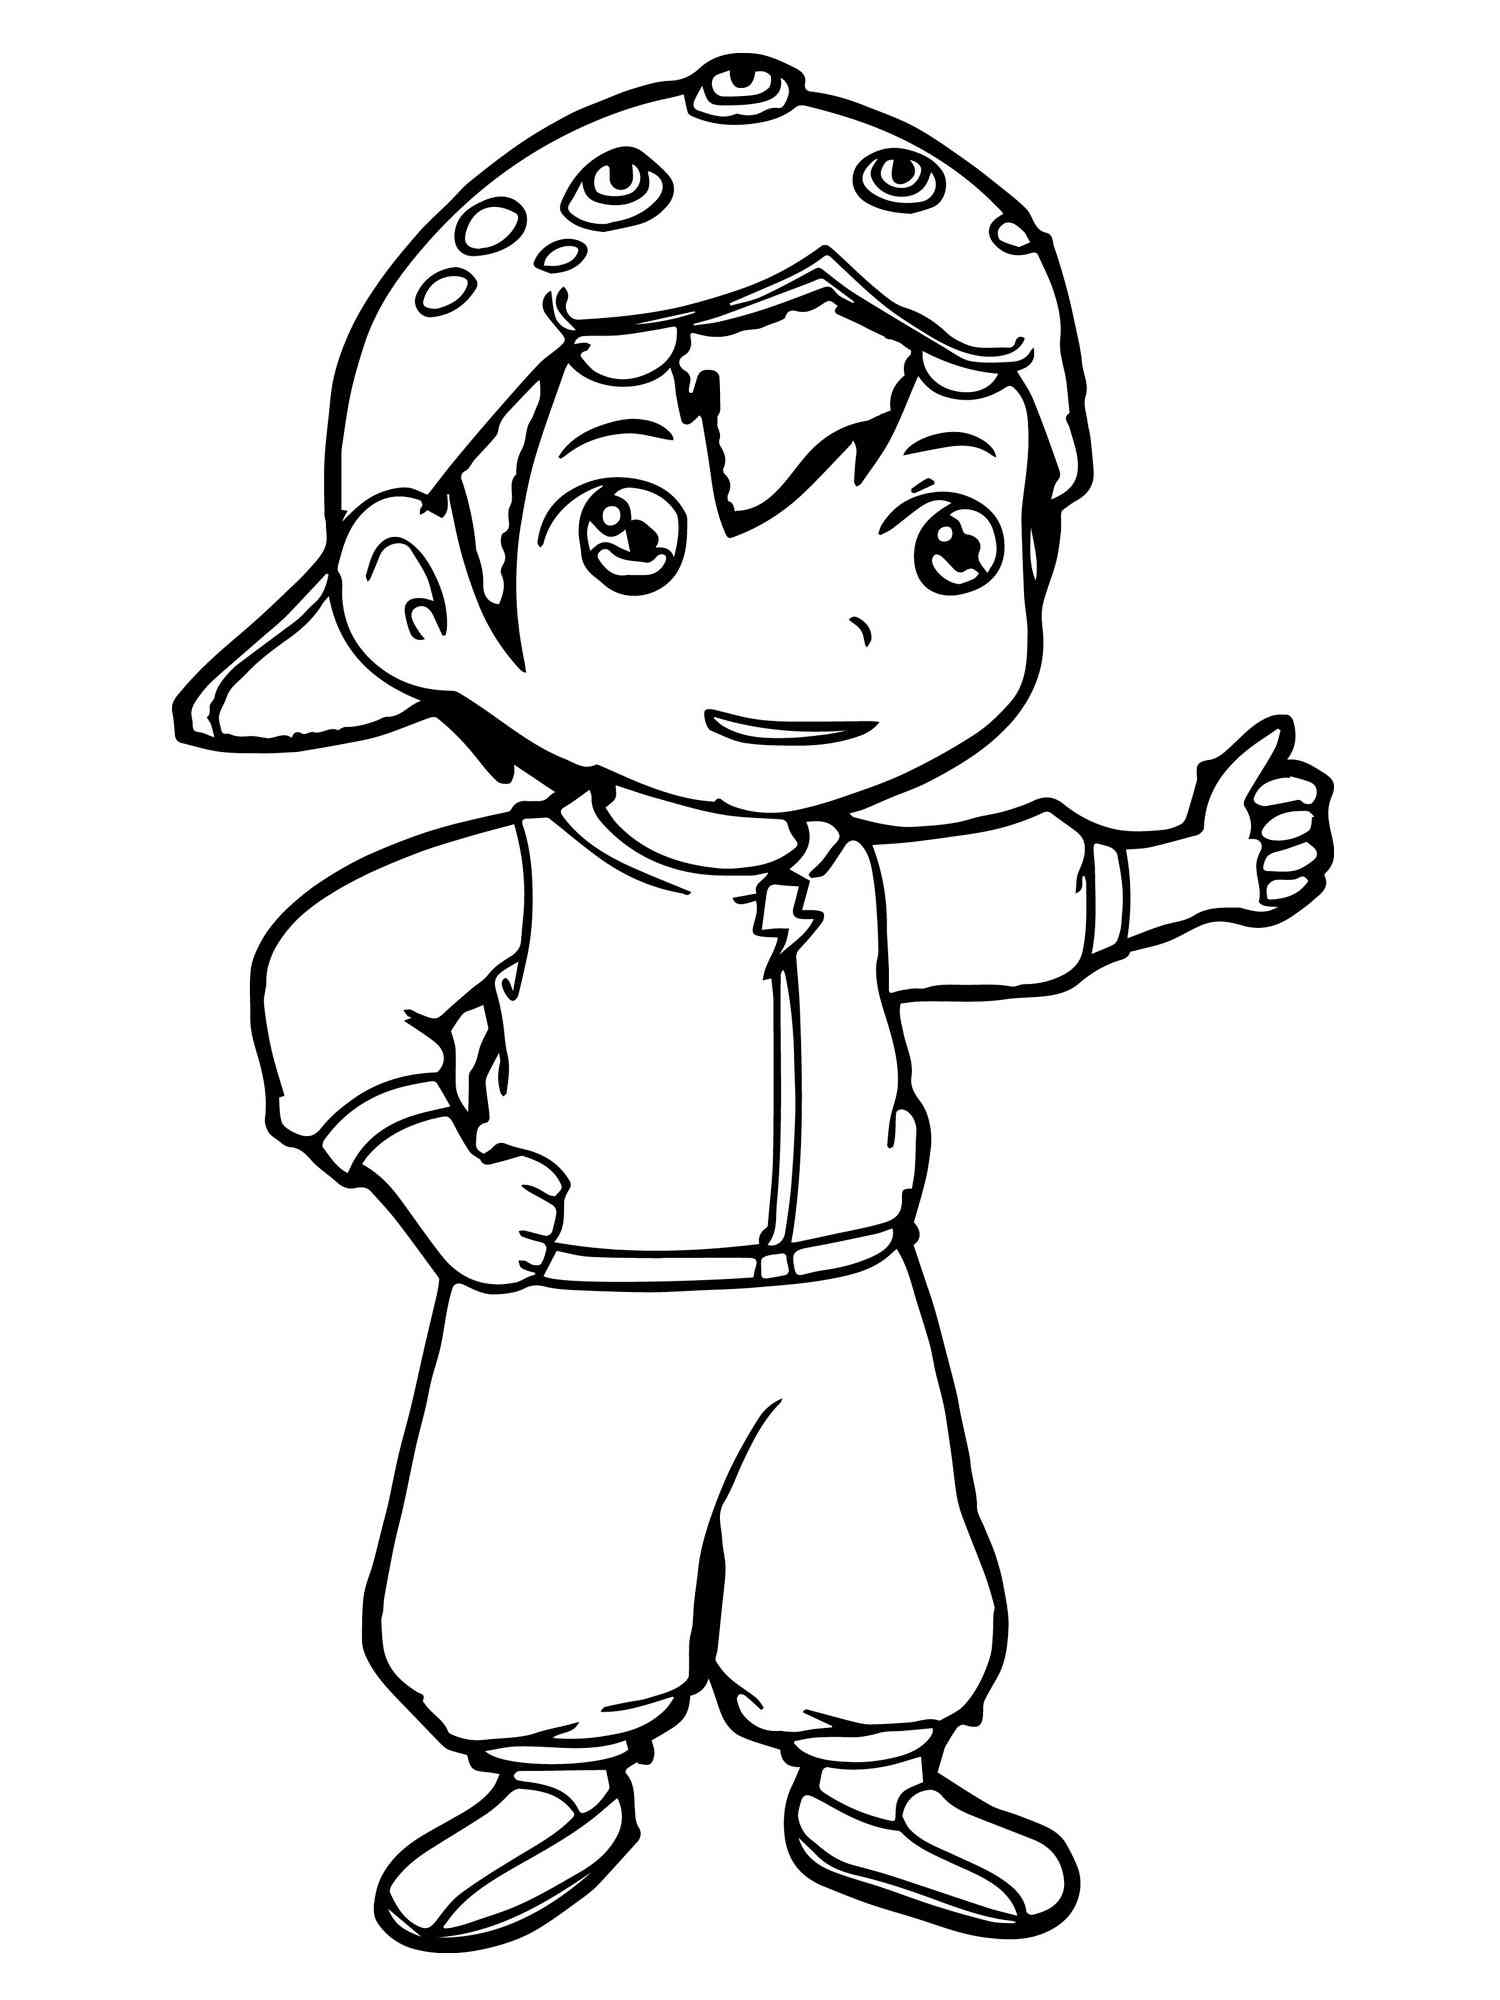 BoBoiBoy coloring pages. Free printable BoBoiBoy coloring pages